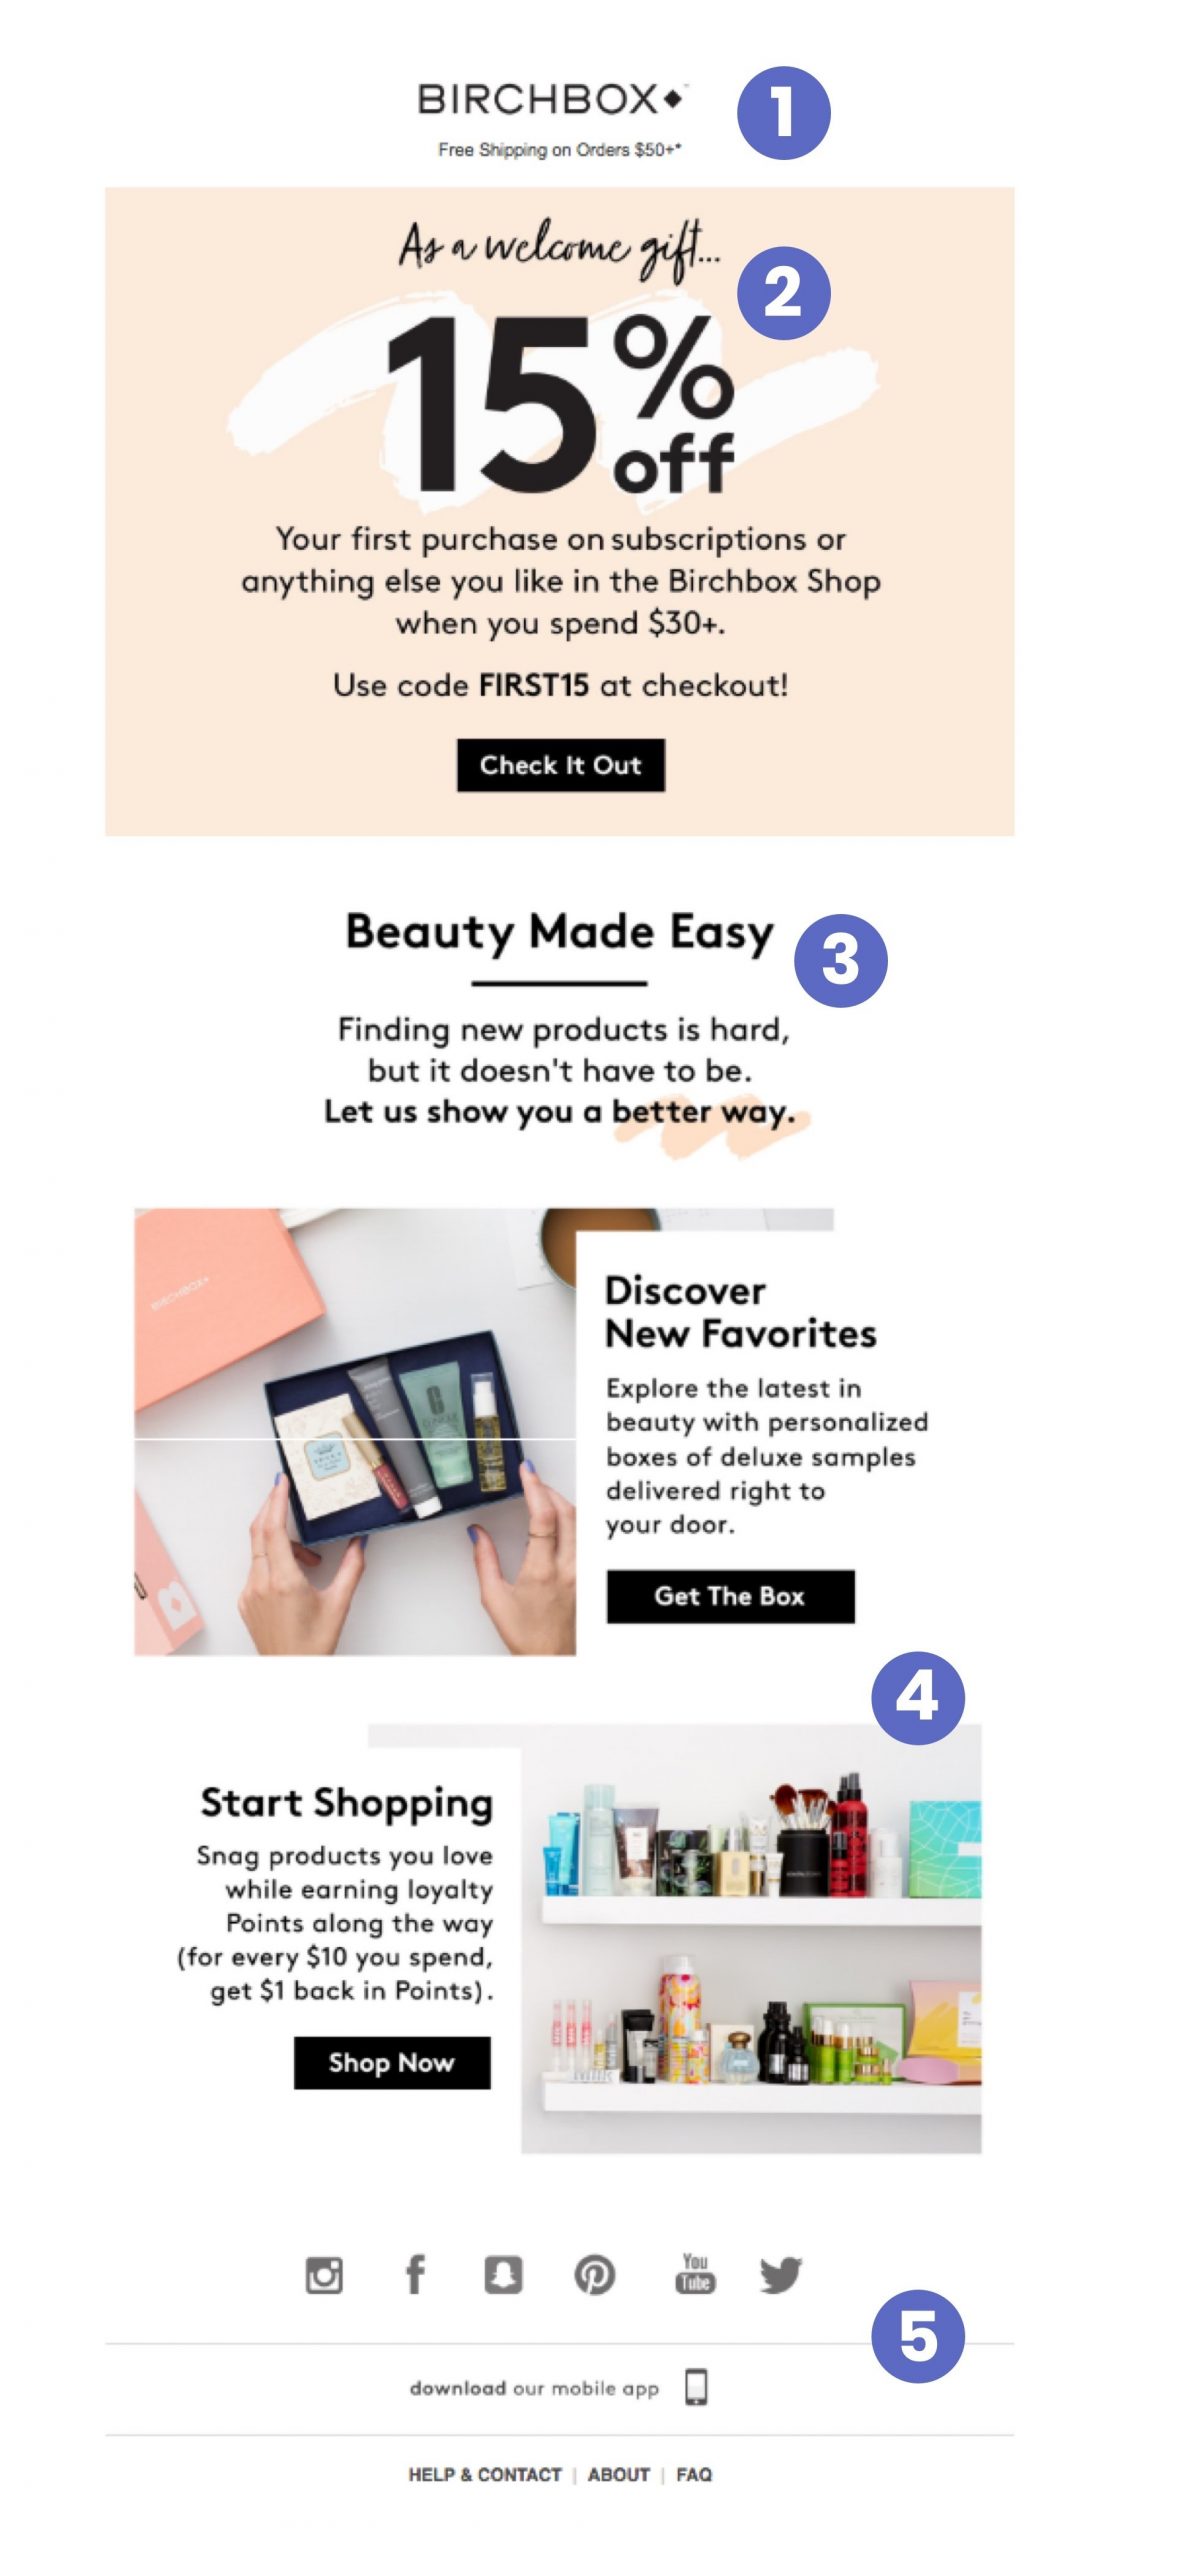 17+ Call-to-Action Examples: How to Create Converting eCommerce CTAs for All Marketing Channels